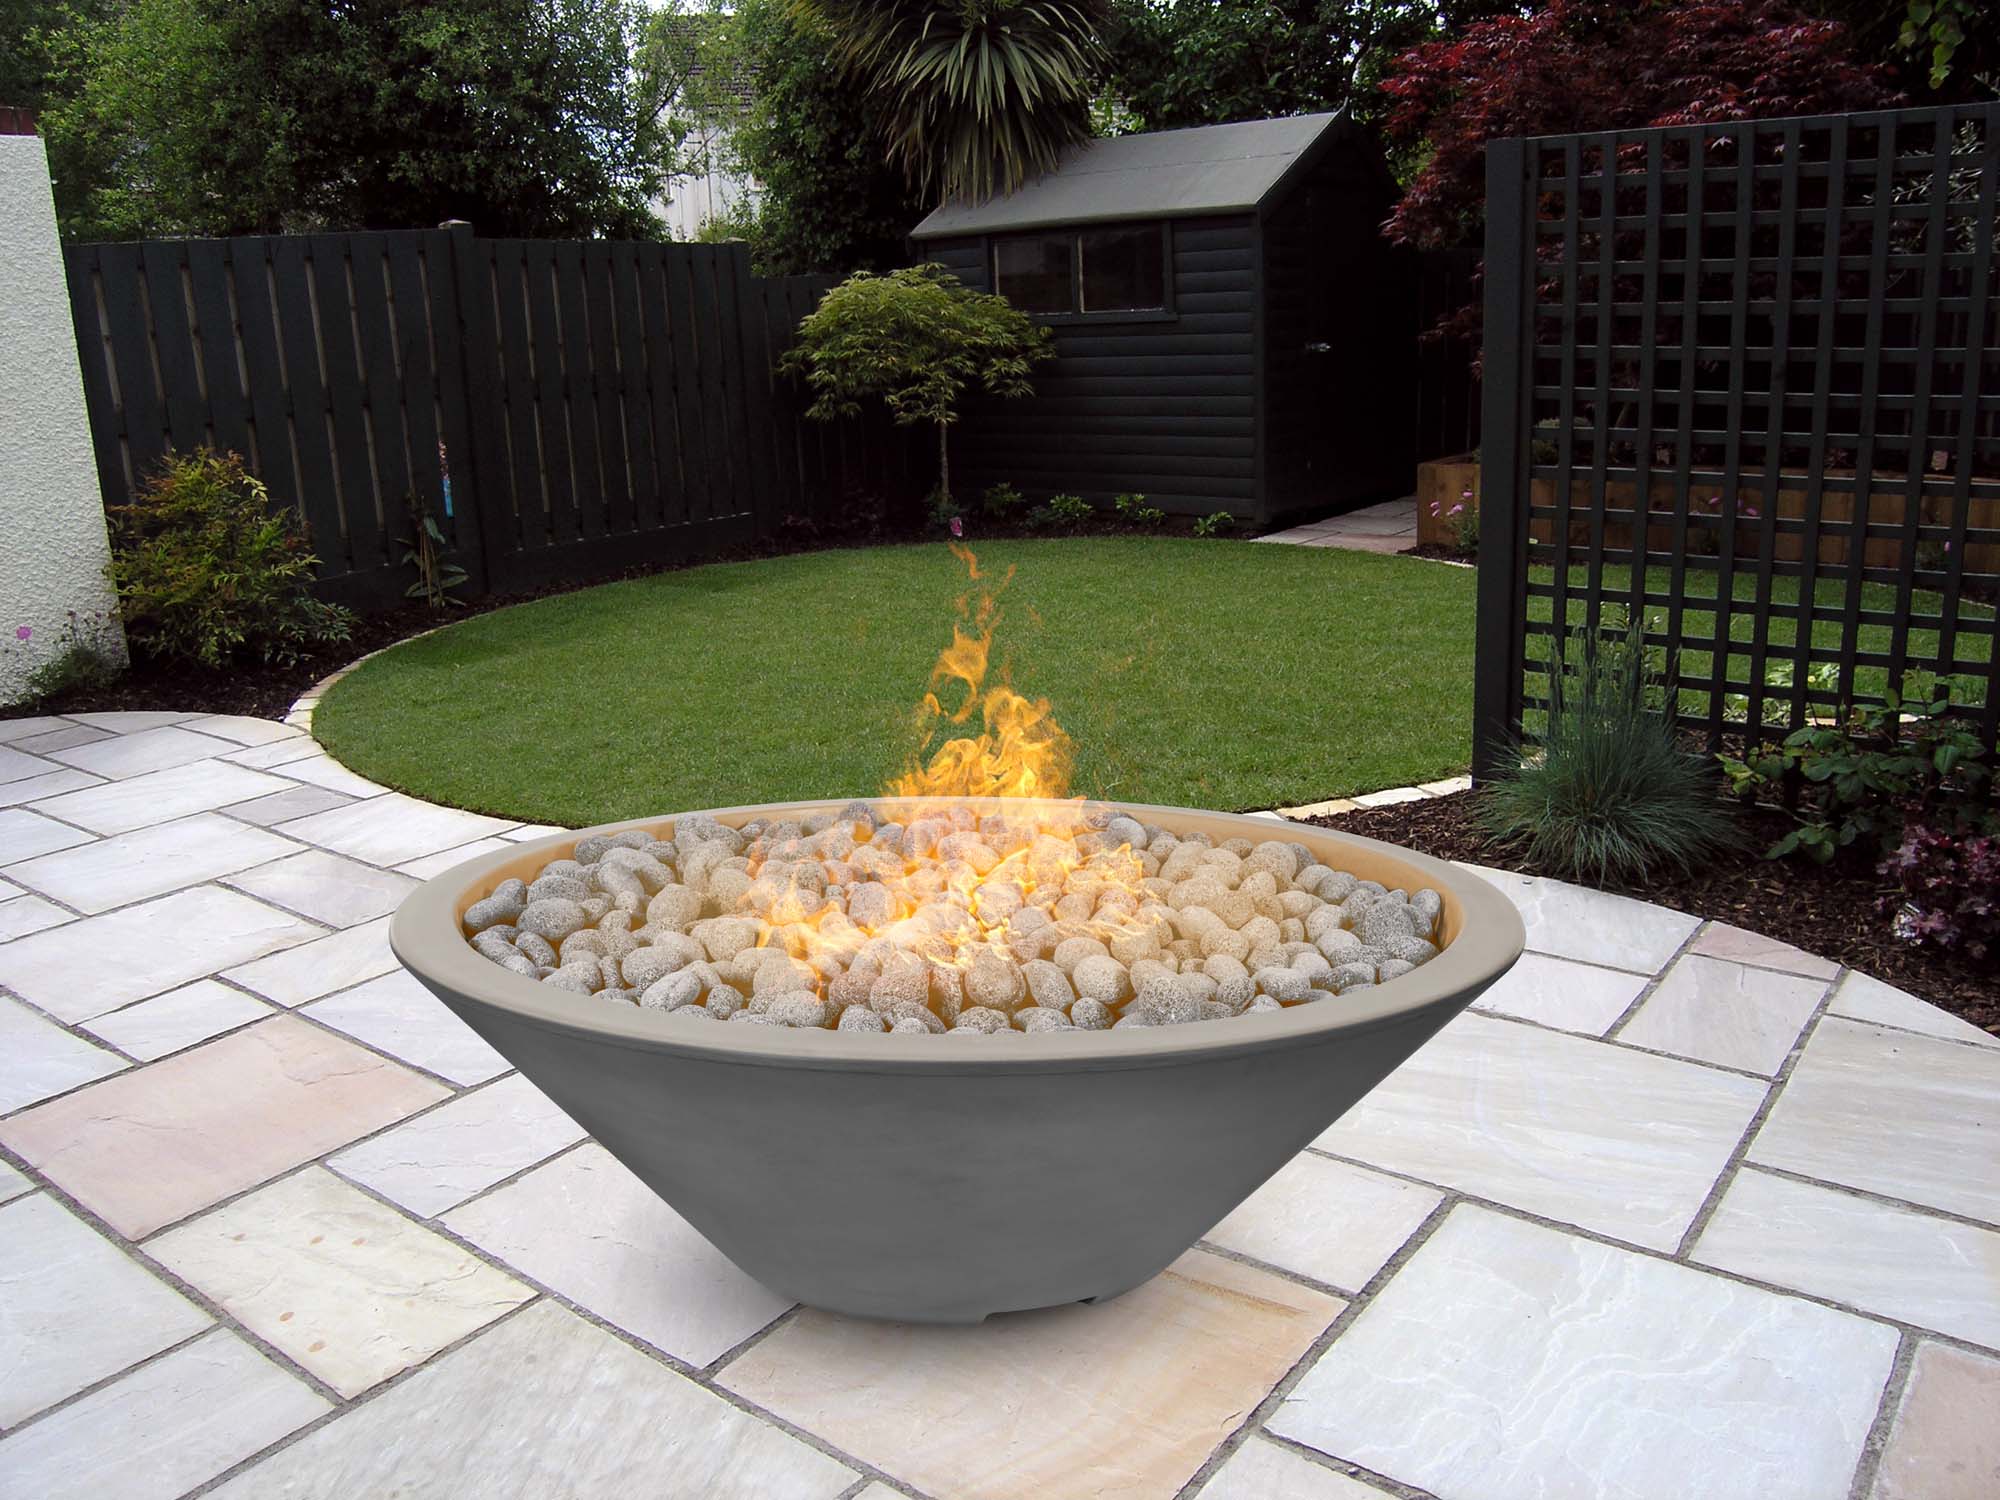 The Outdoor Plus 60" Narrow Ledge Round Cazo Fire Pit-GFRC Concrete -Spark Ignition with Flame Sense -Natural Gas- Lifestyle Outdoor